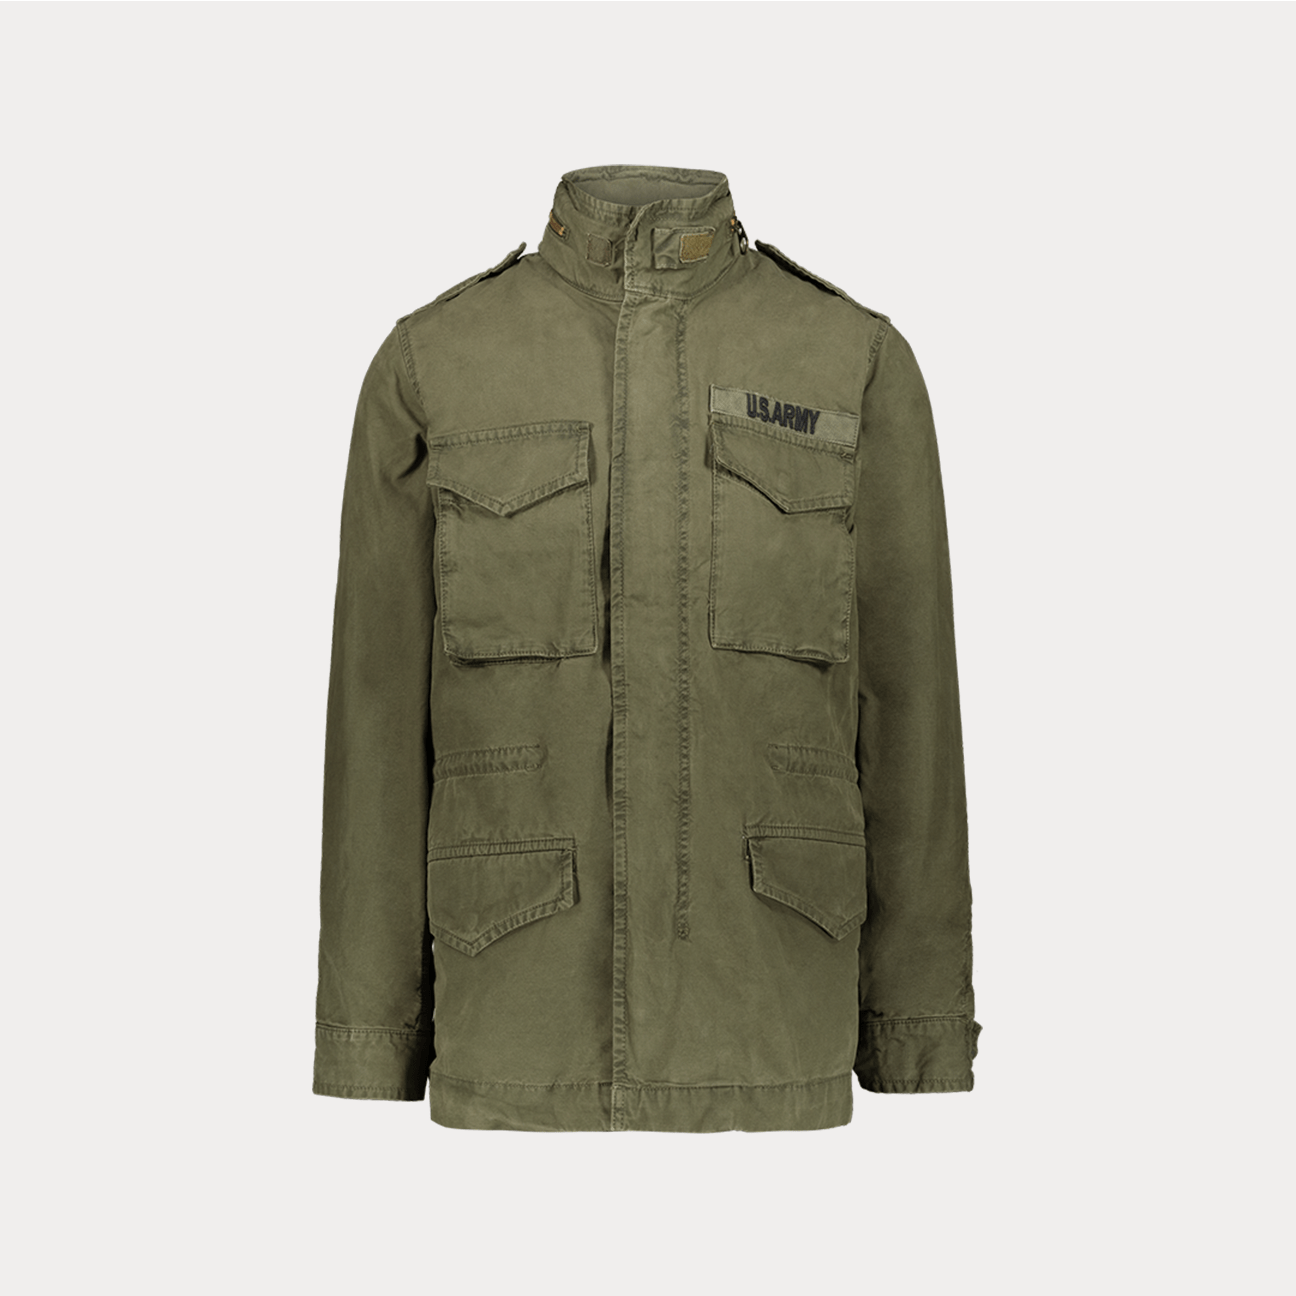 CHESAPEAKES Giacca M65 Field Jacket Verde Militare